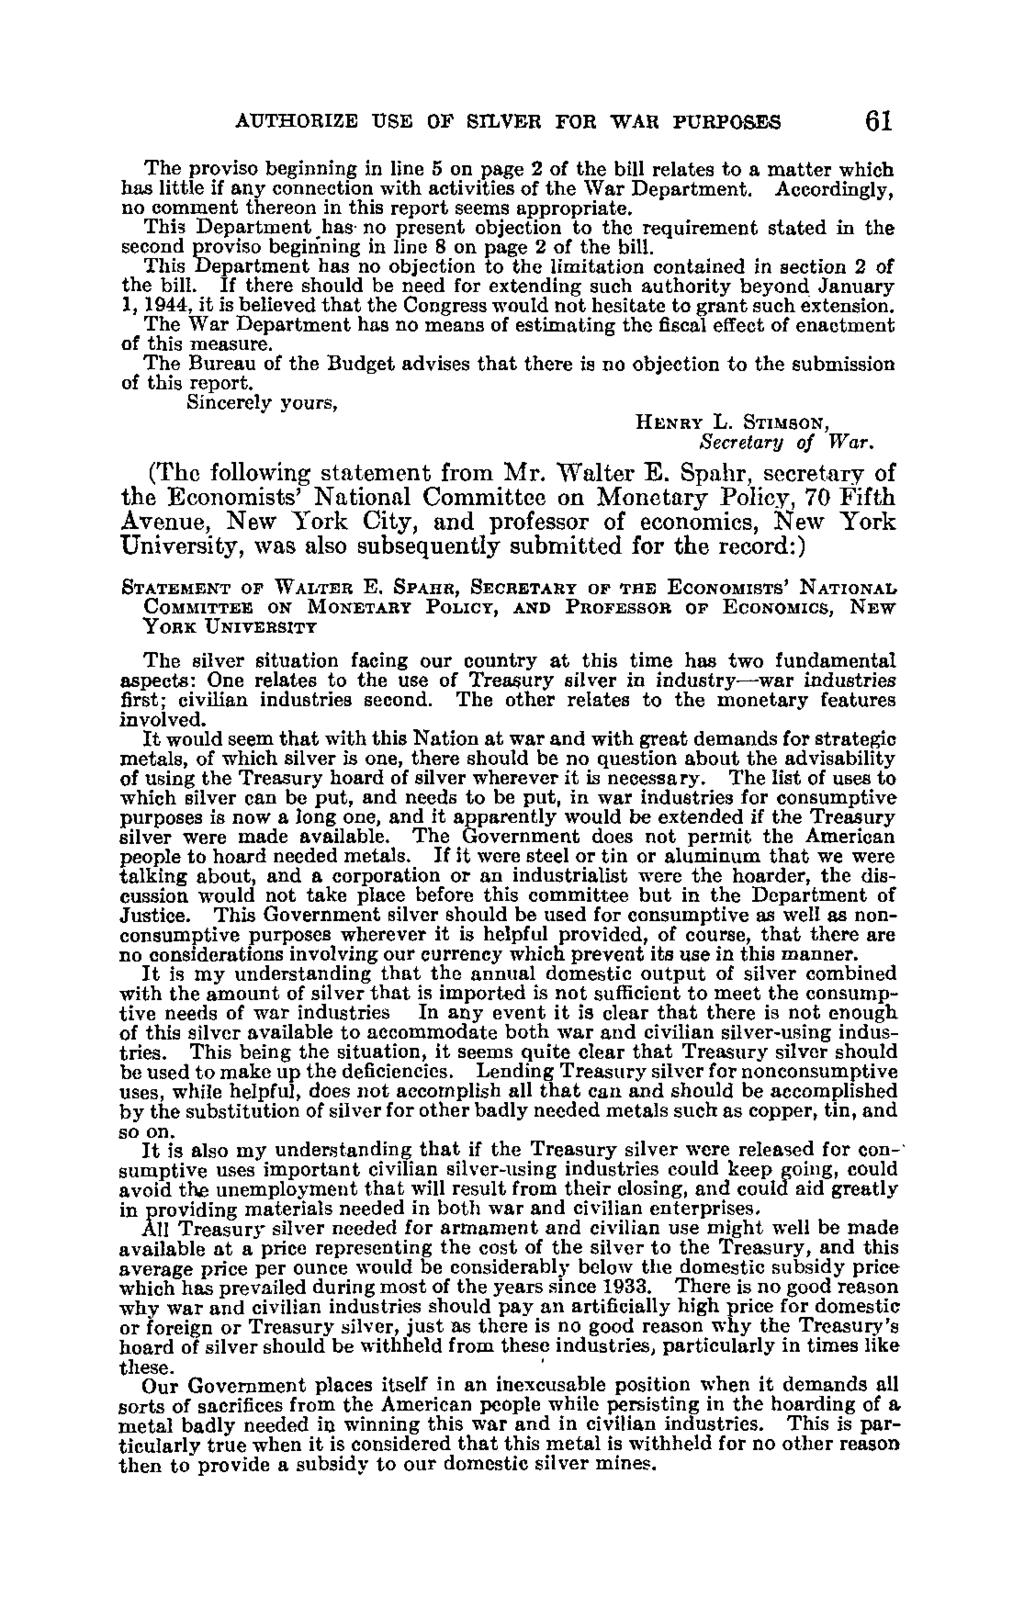 61 AUTHORIZE USE OF SILVER FOR WAR PURPOSES The proviso beginning in line 5 on page 2 of the bill relates to a matter which has little if any connection with activities of the War Department.